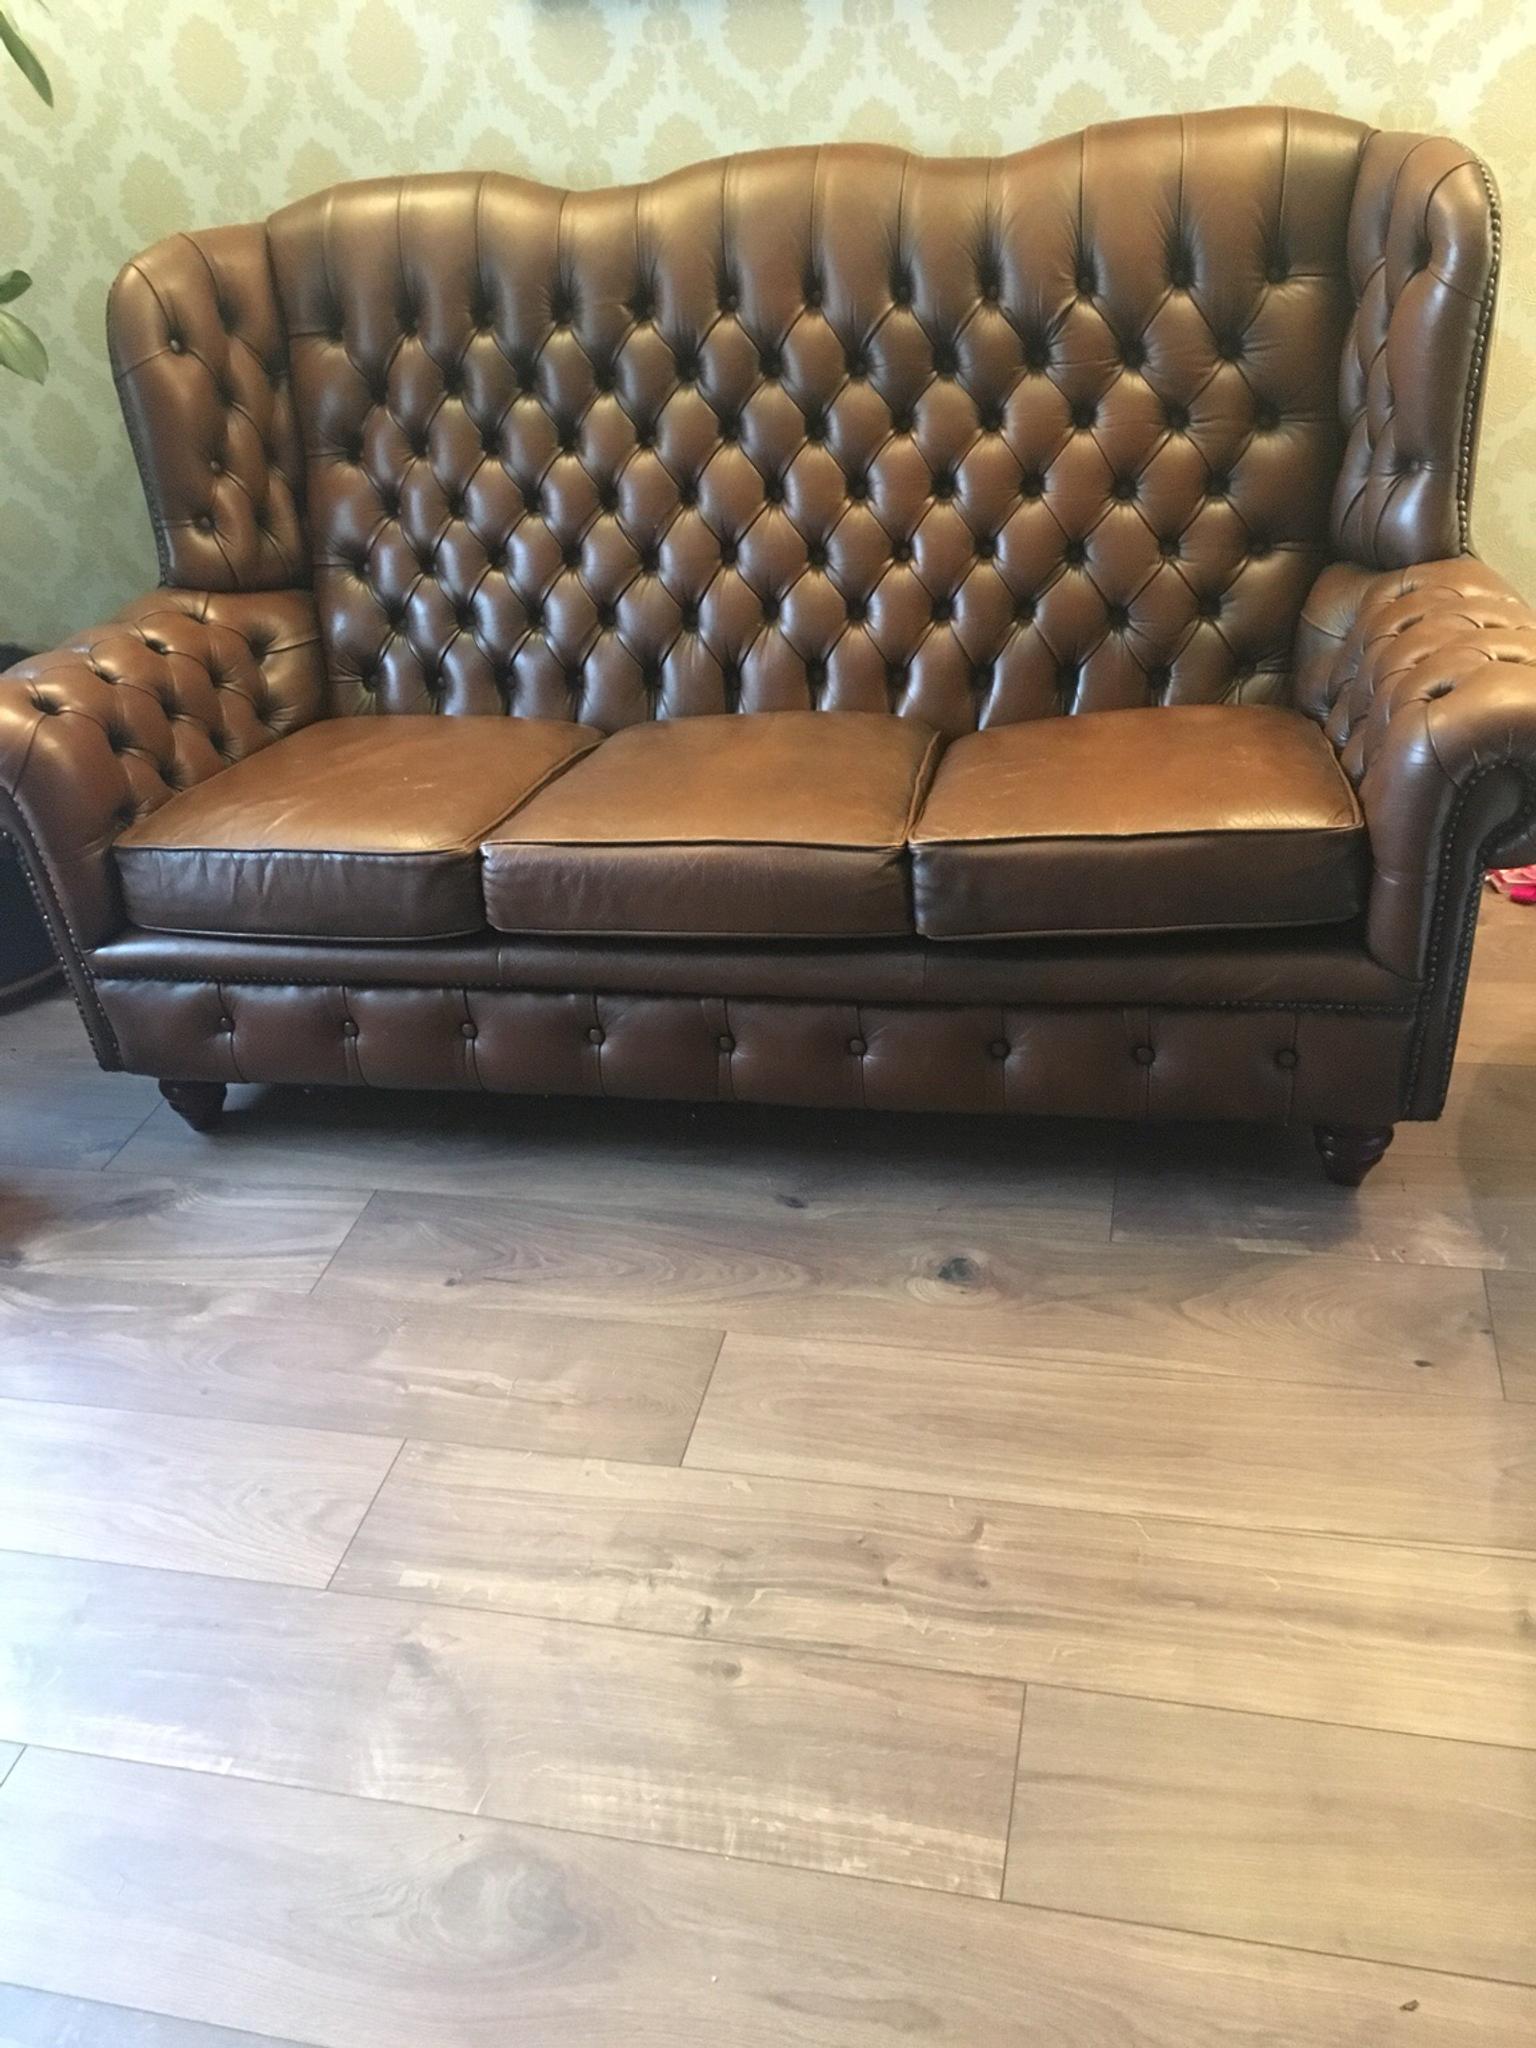 Vintage Chesterfield Sofas High Top In Bs41 Dundry Fur 450 00